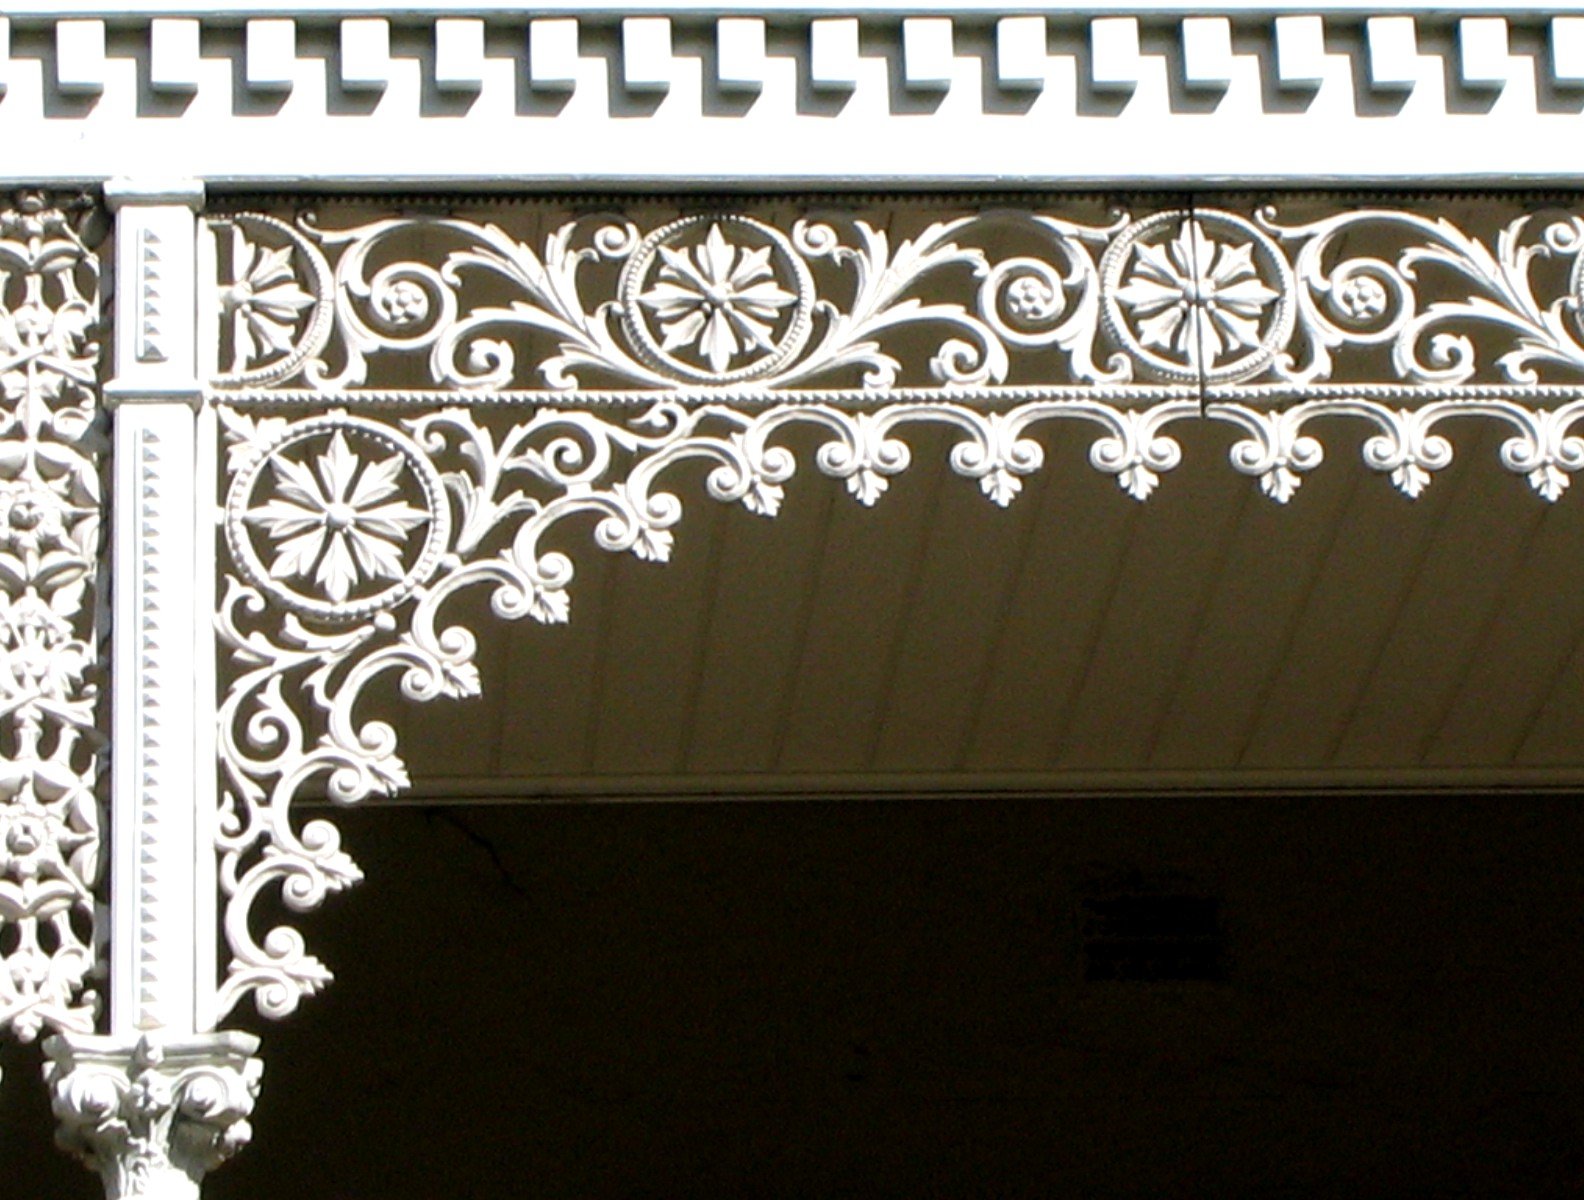 the ornate iron work on the side of a building